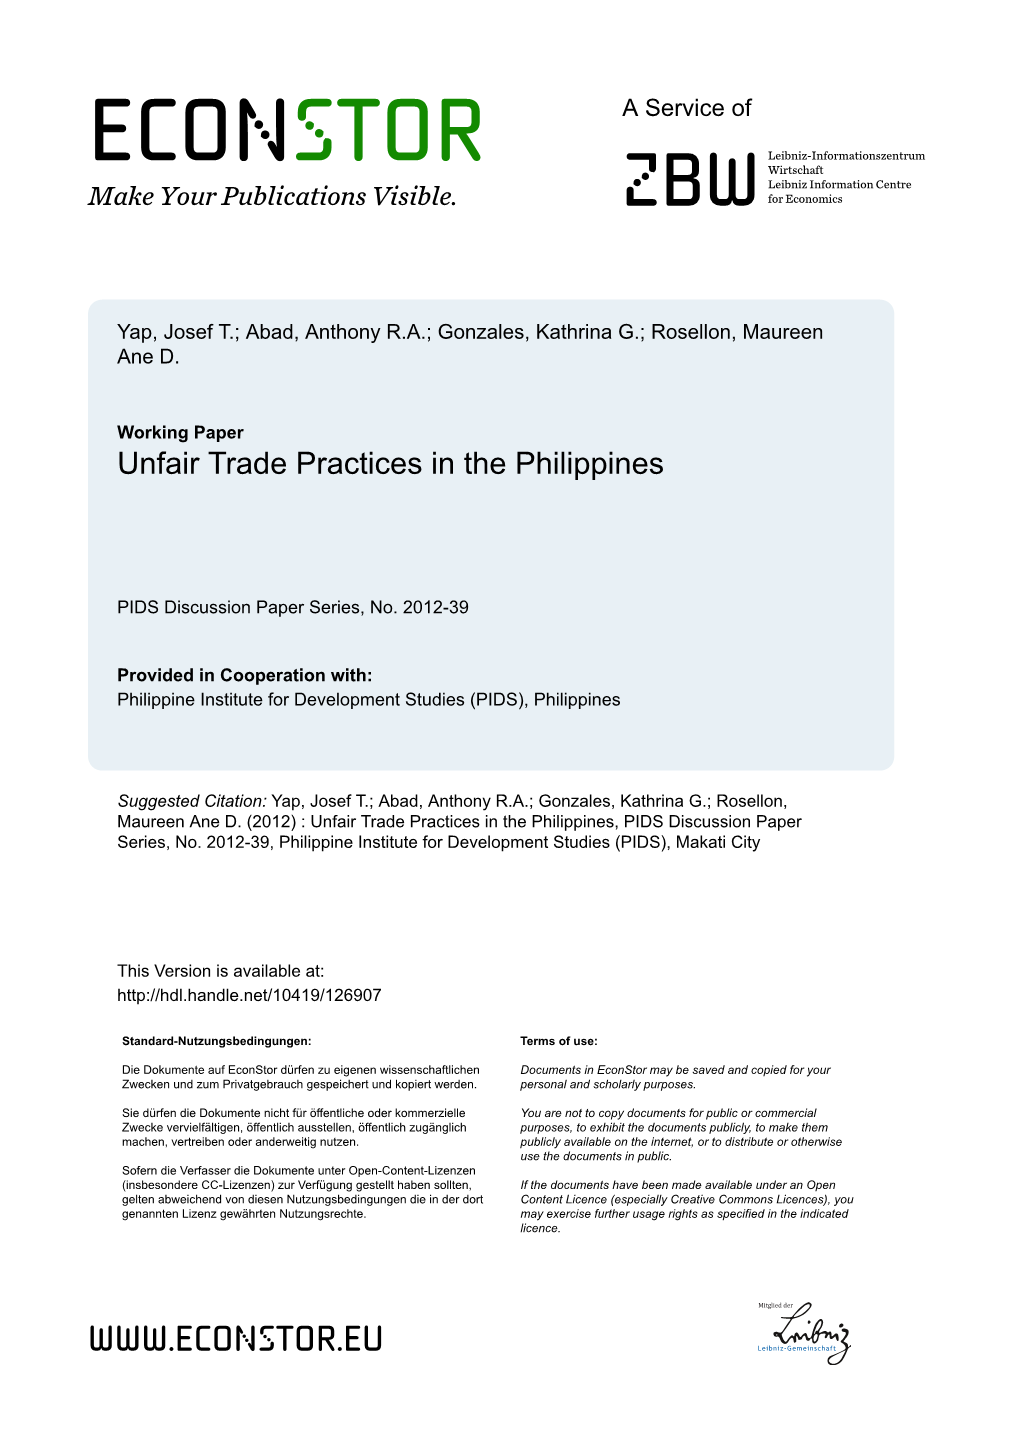 Unfair Trade Practices in the Philippines